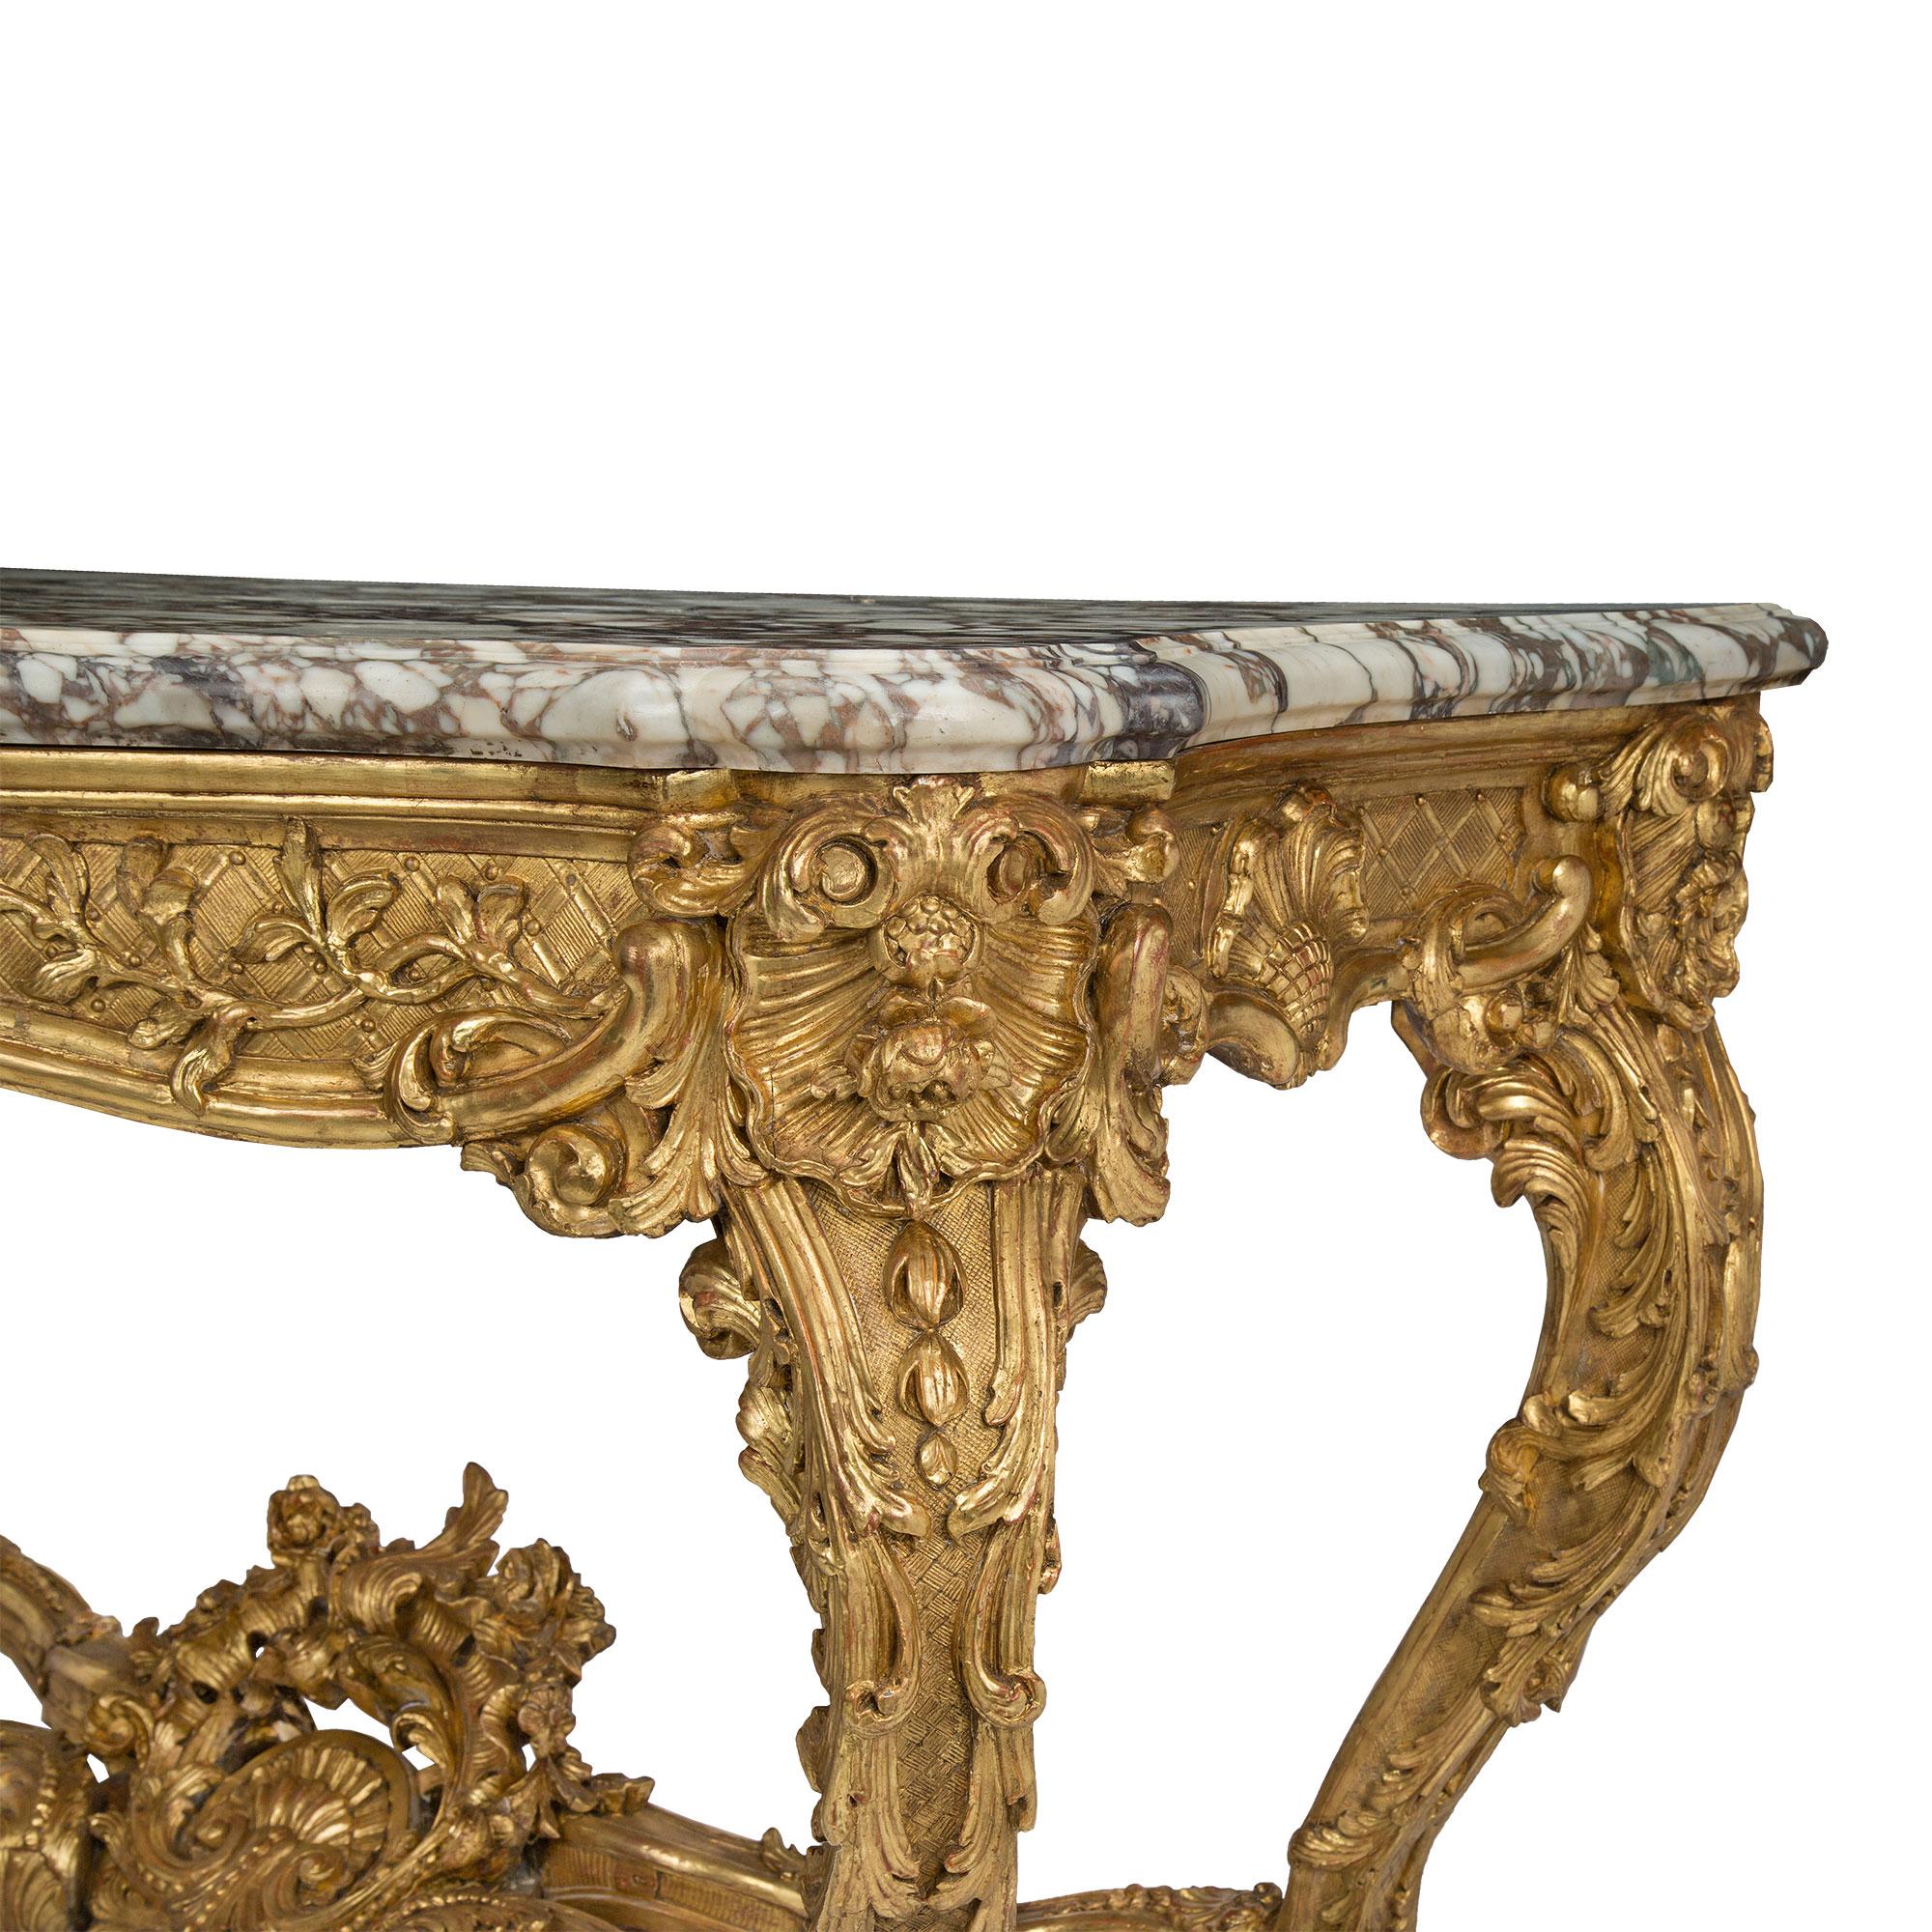 French 18th Century Regence Period Giltwood and Marble Freestanding Console For Sale 3